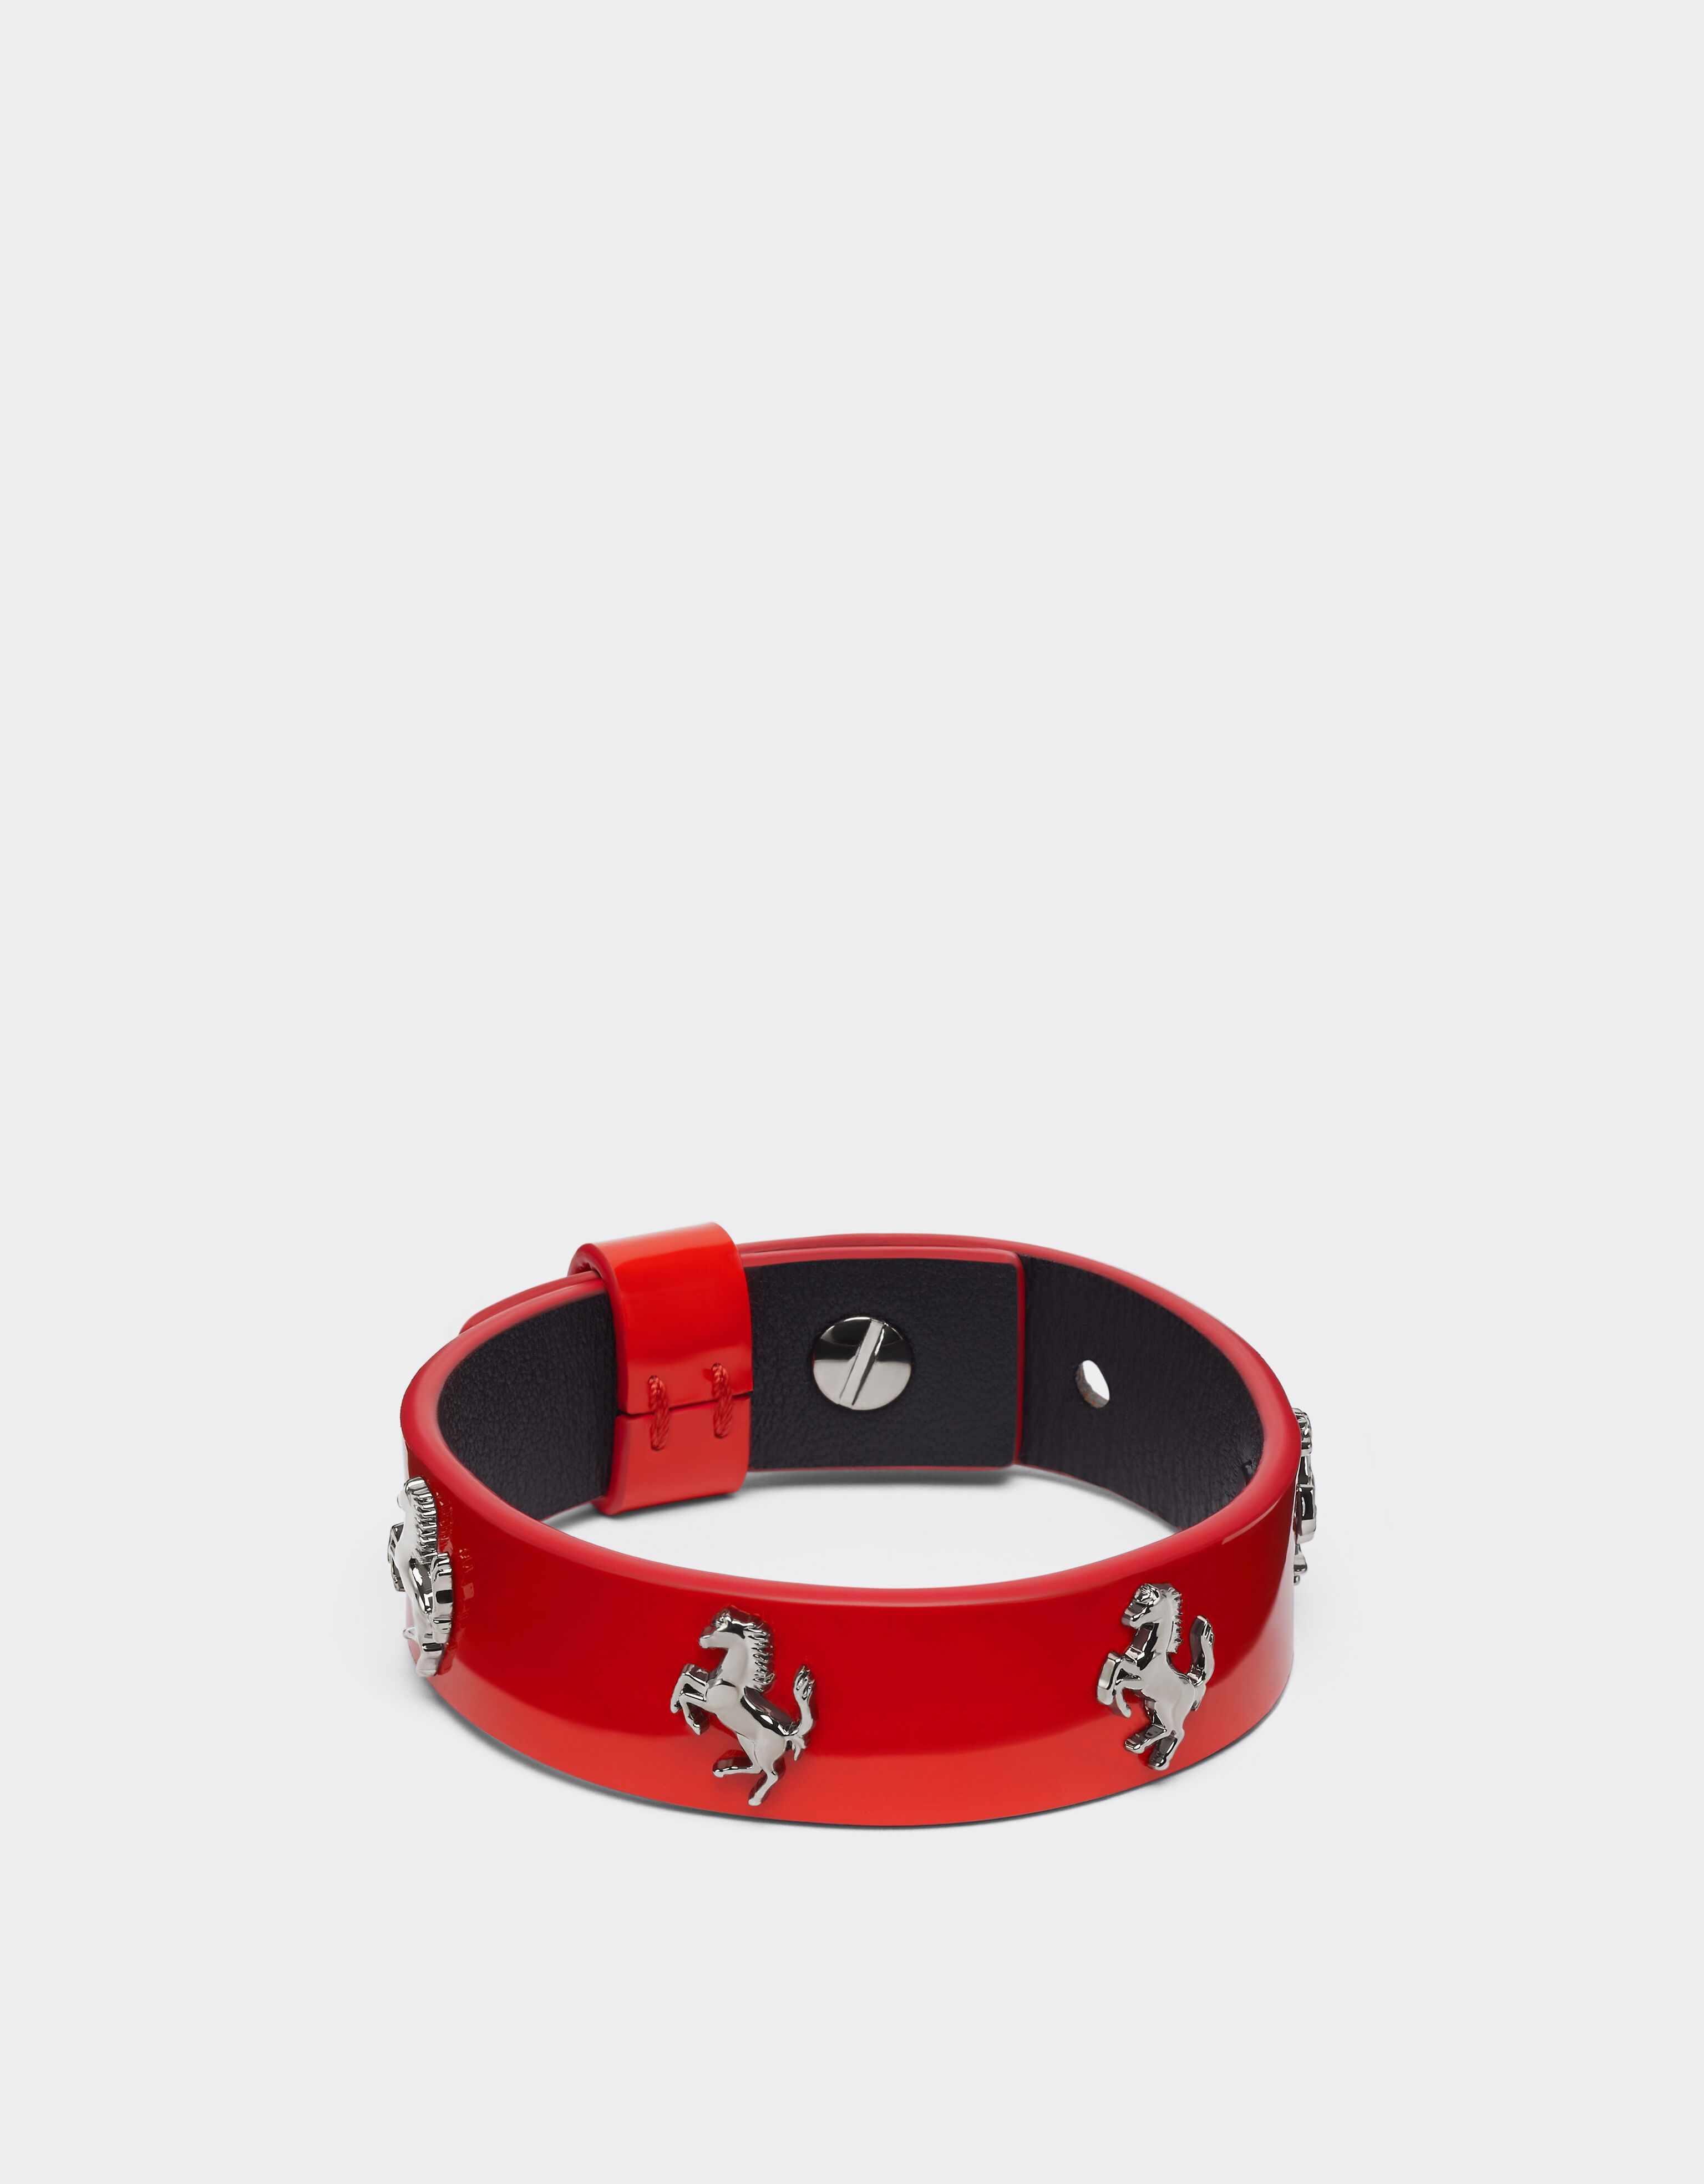 Ferrari Bracelet in red patent leather with studs Rosso Dino 20260f